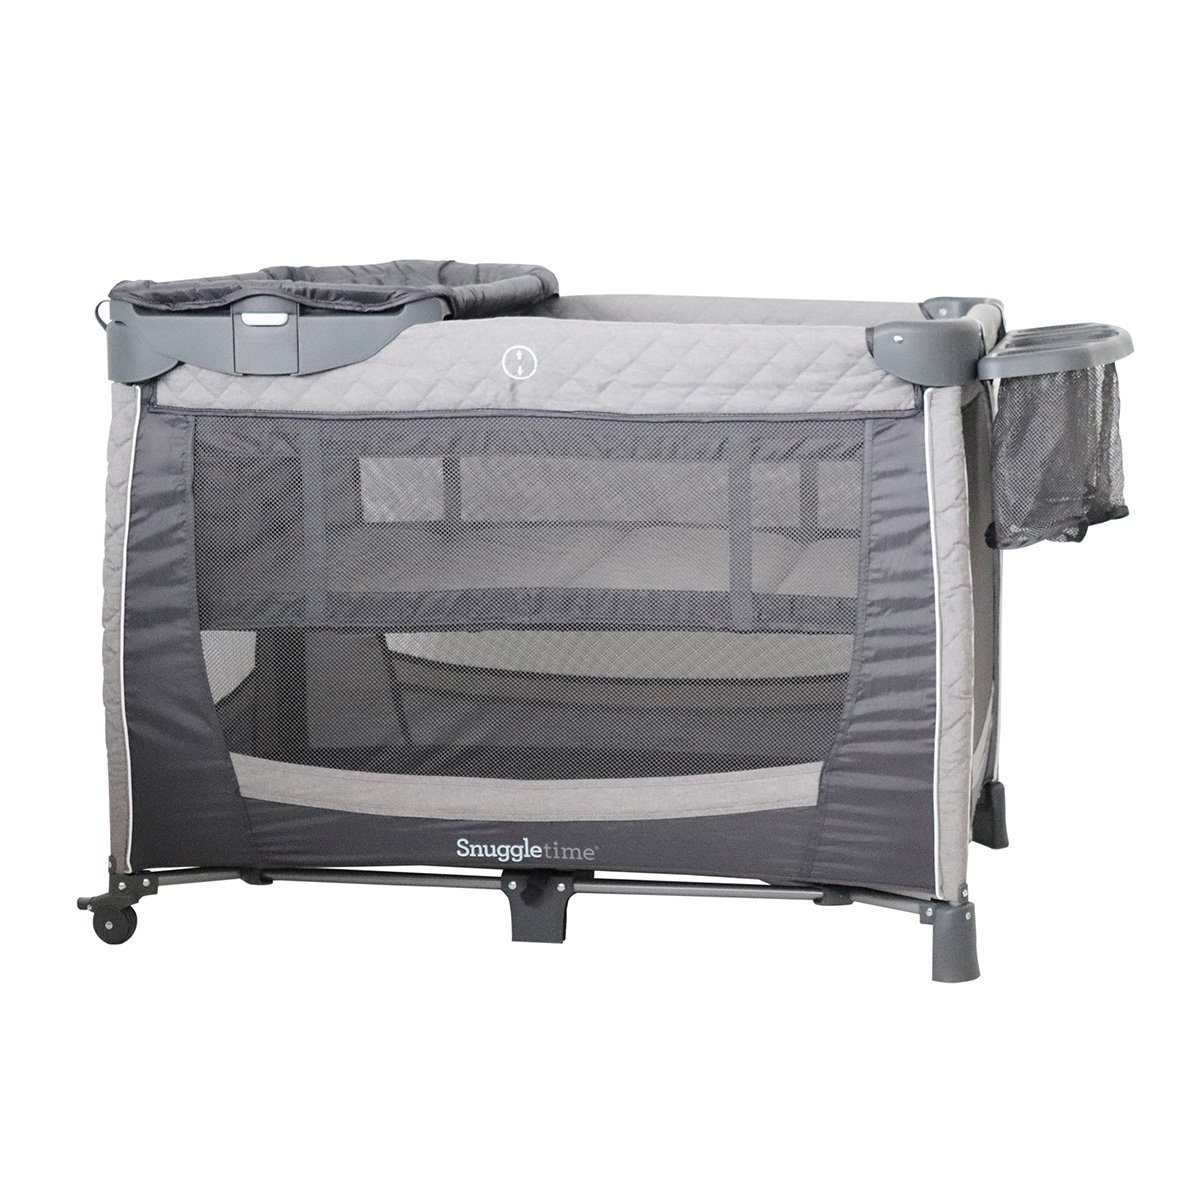 Snuggletime Luxury Camp Cot with Changer